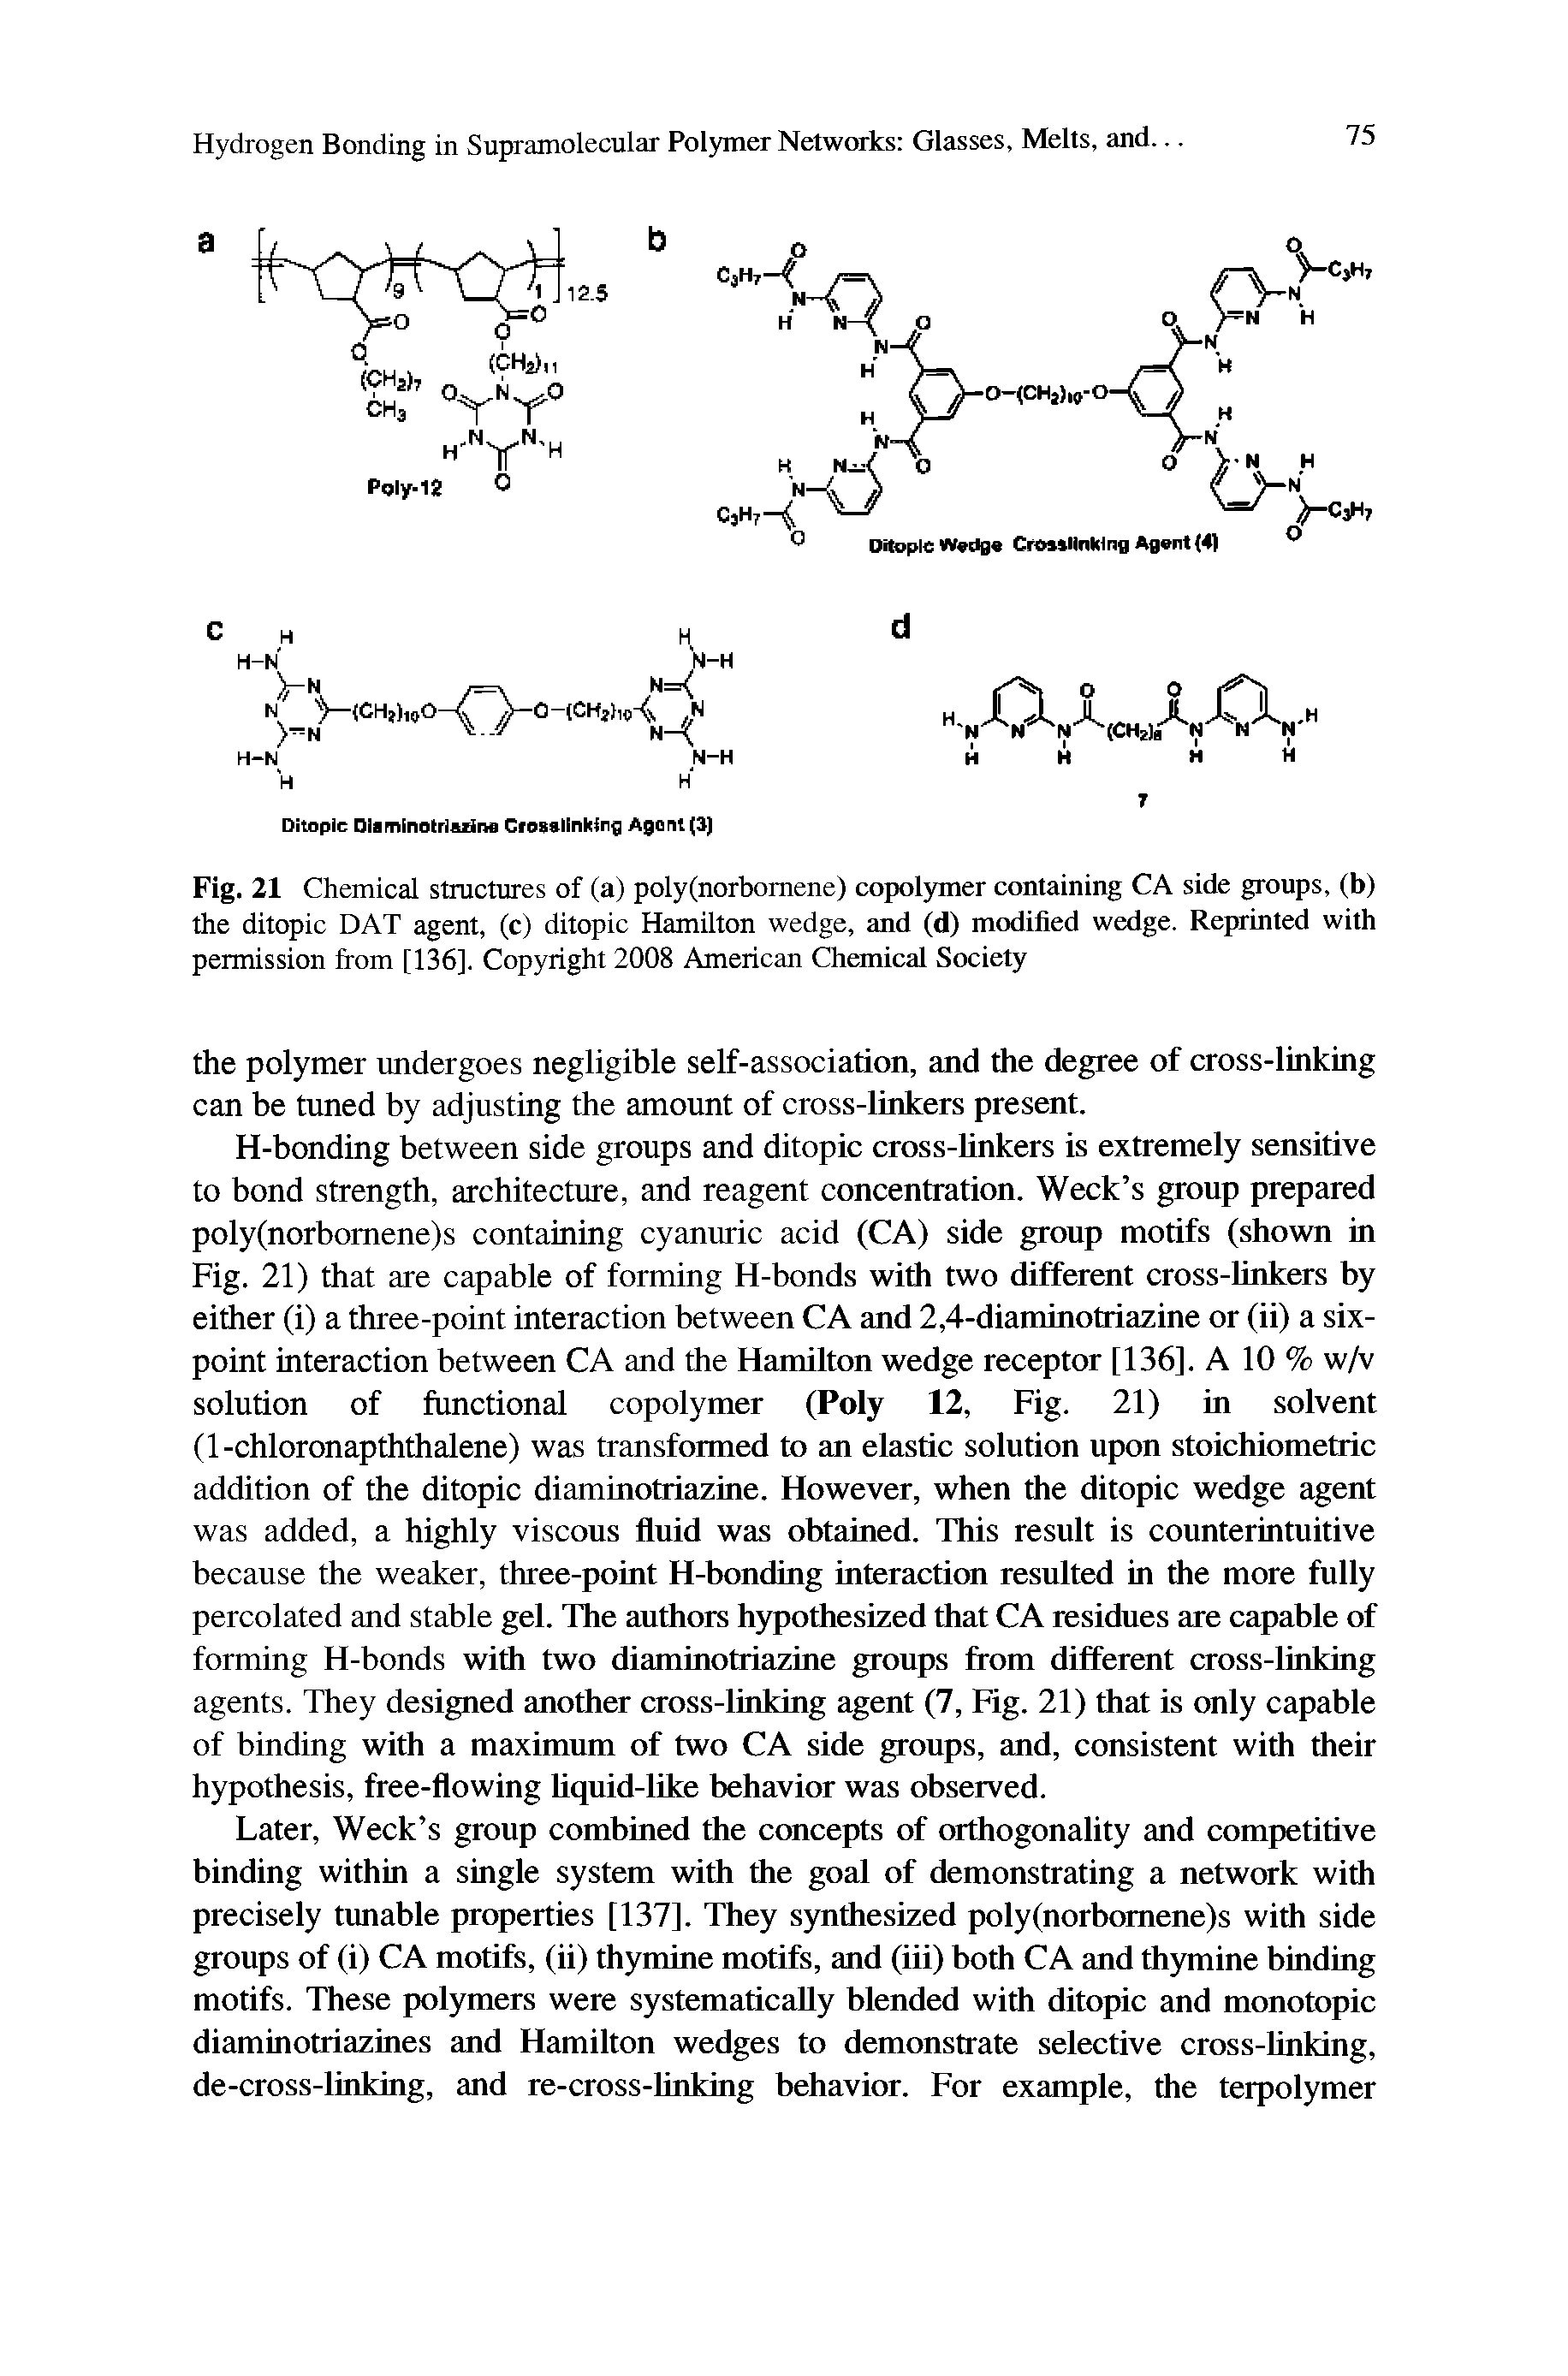 Fig. 21 Chemical structures of (a) poly(norbomene) copolymer containing CA side groups, (b) the ditopic DAT agent, (c) ditopic Hamilton wedge, and (d) modified wedge. Reprinted with permission from [136], Copyright 2008 American Chemical Society...